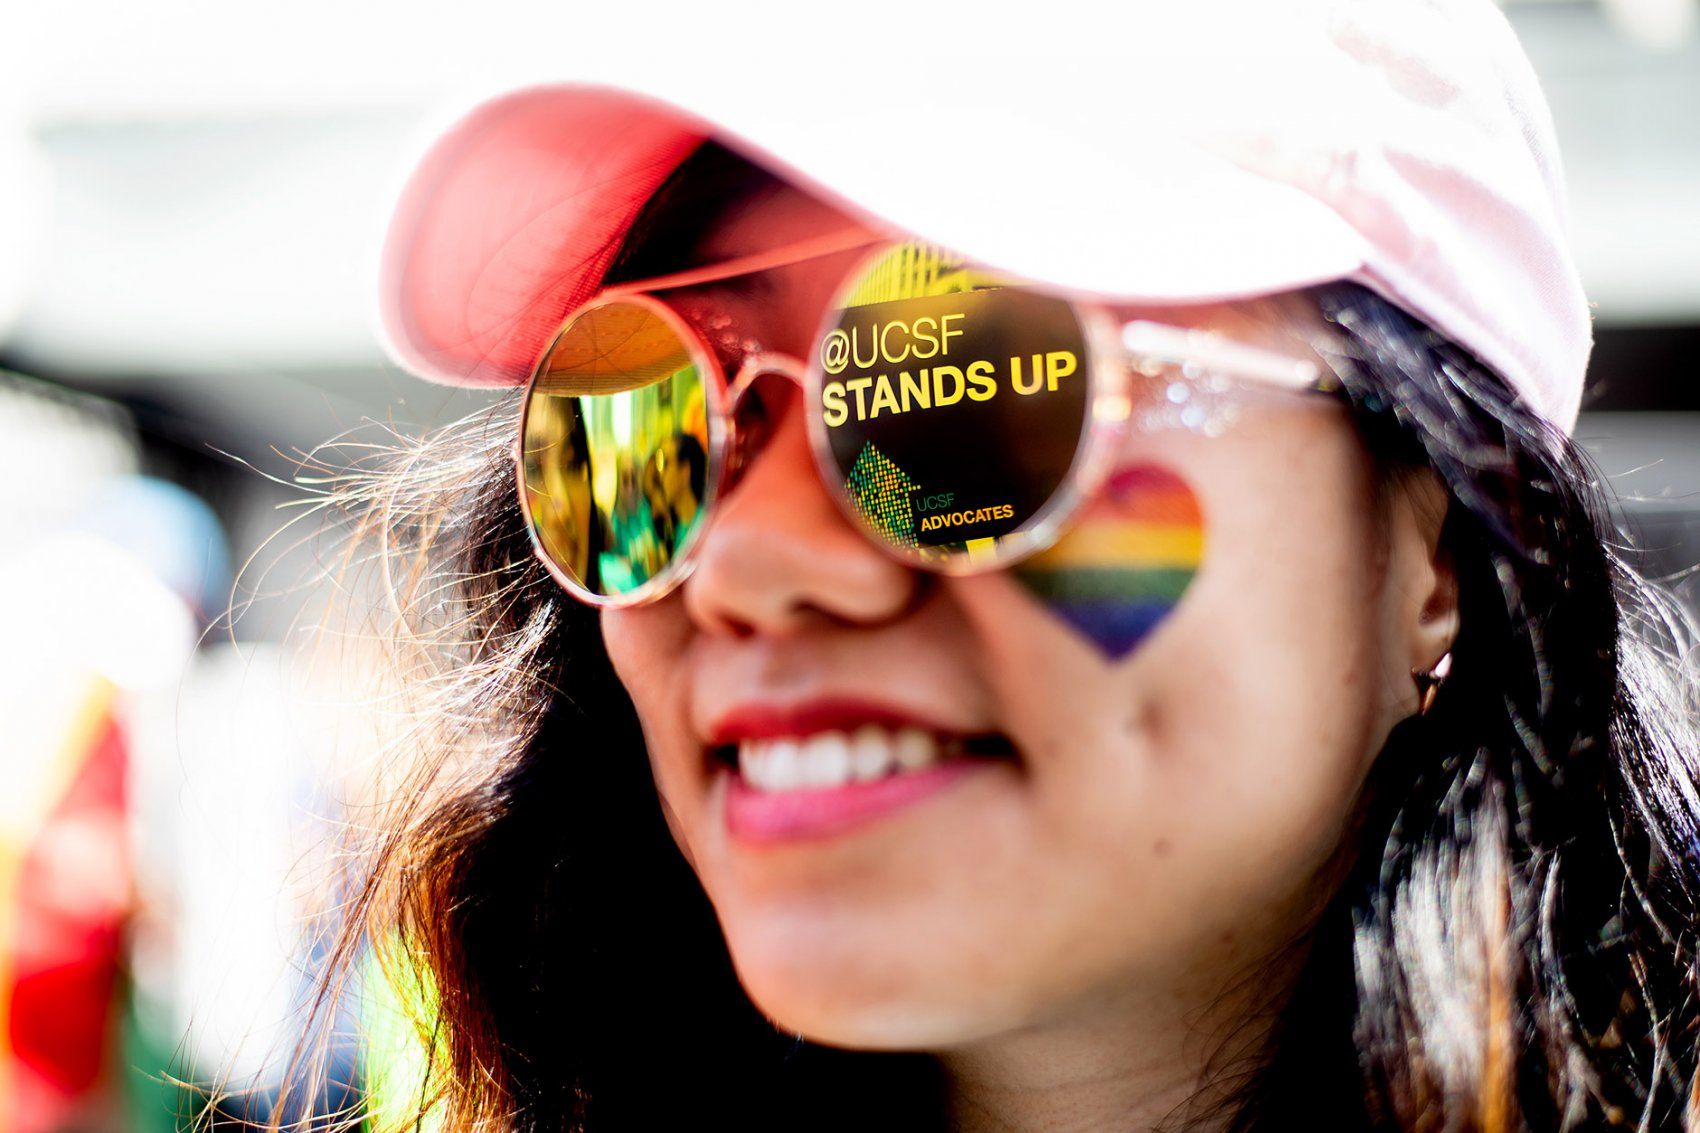 the message "UCSF Stands Up" is reflected on a pair of sunglasses